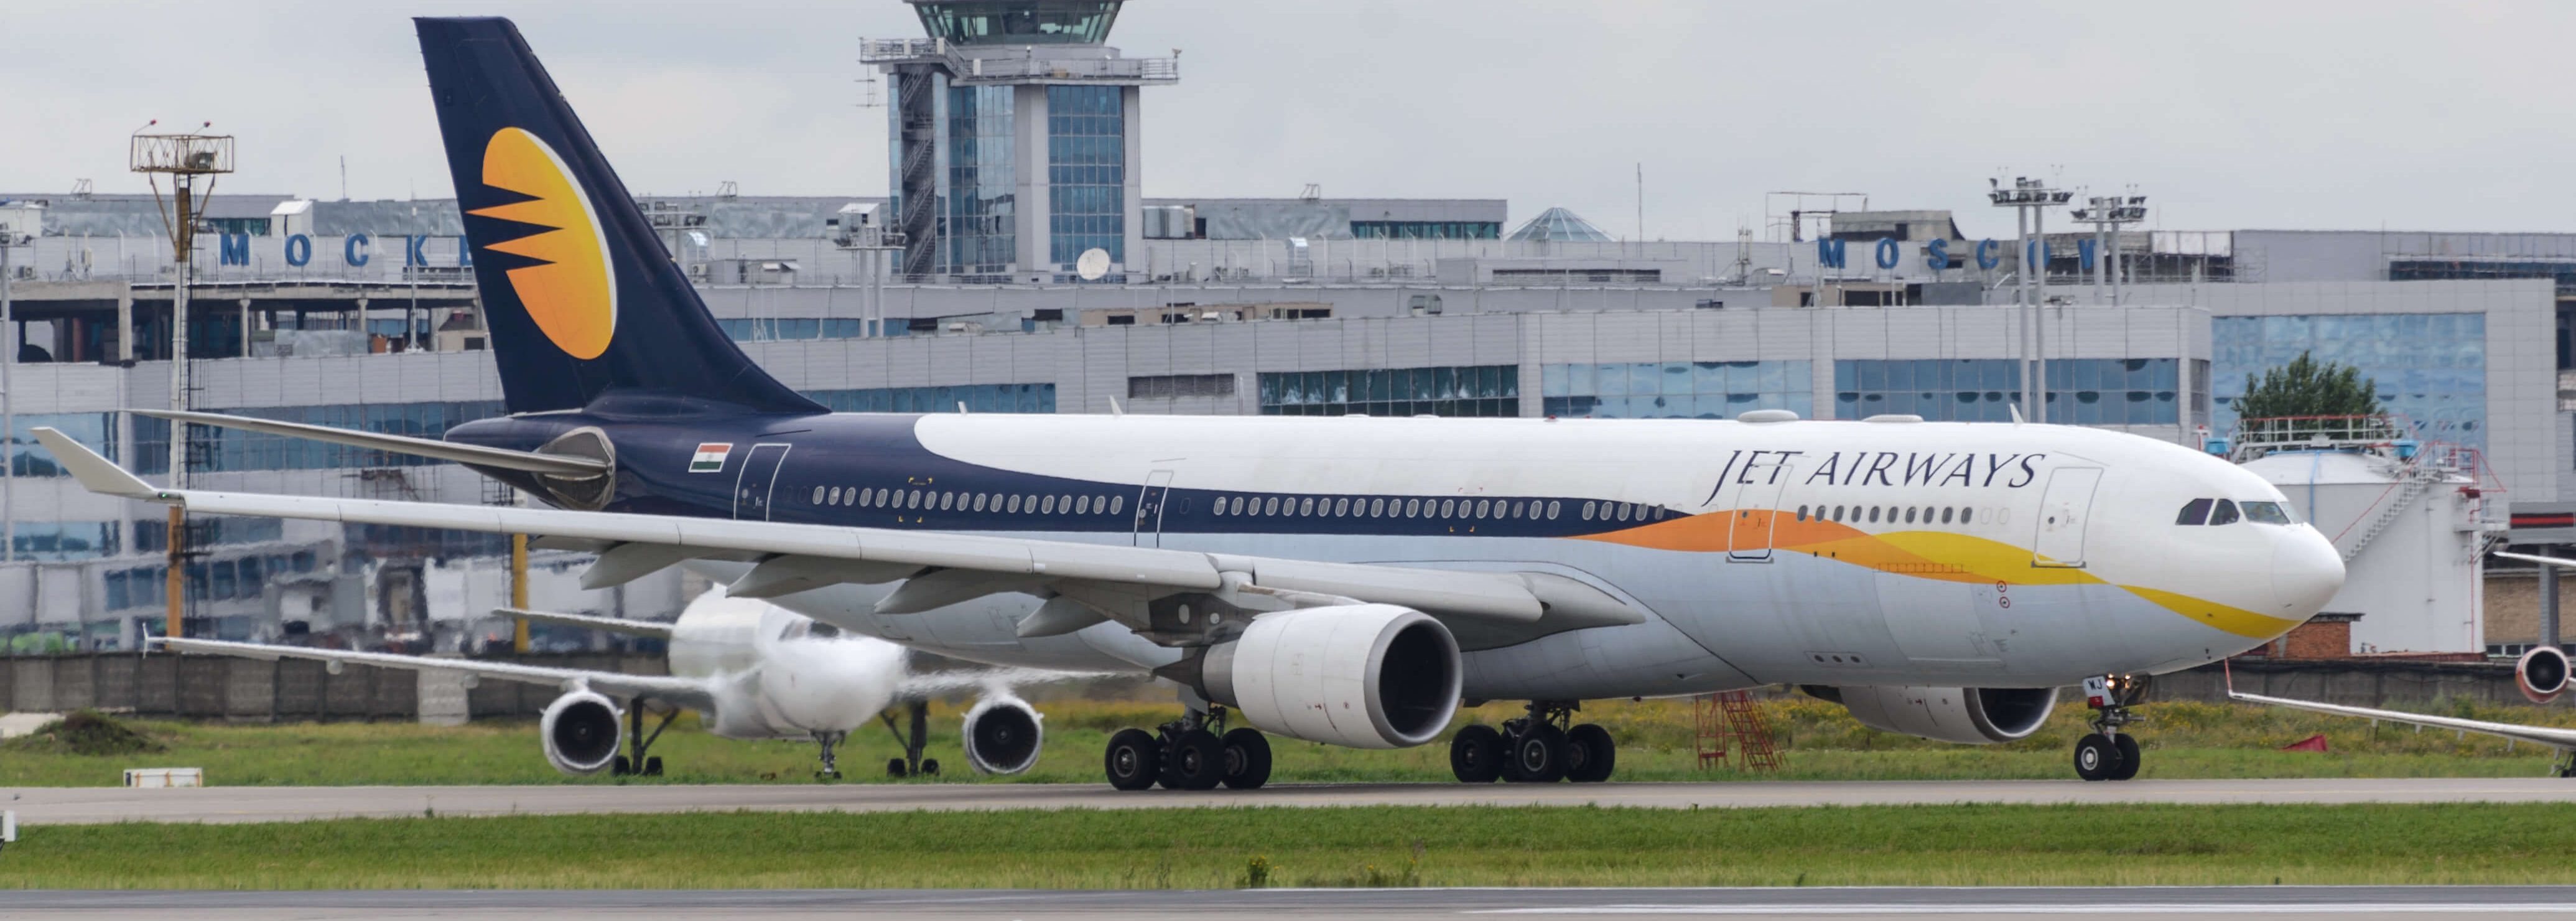 Travelport and Jet Airways sign a new long-term supplier agreement commencing April 2019